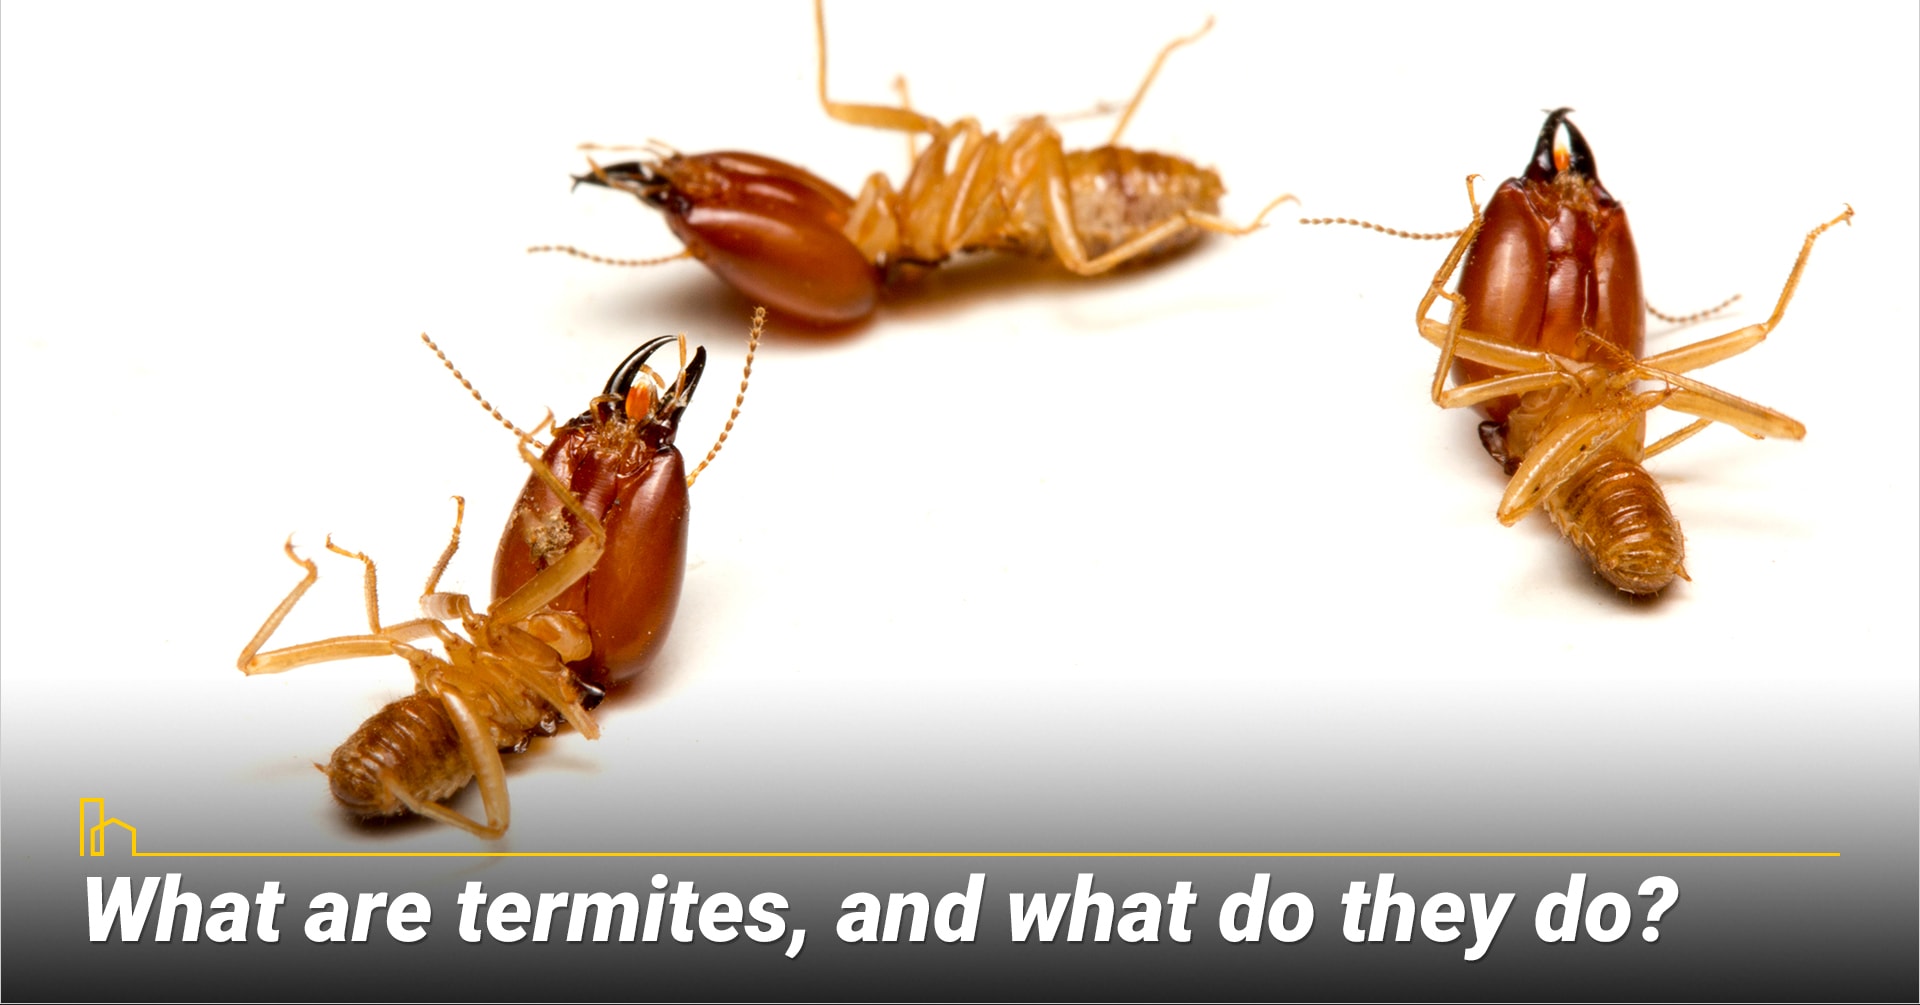 What are termites, and what do they do